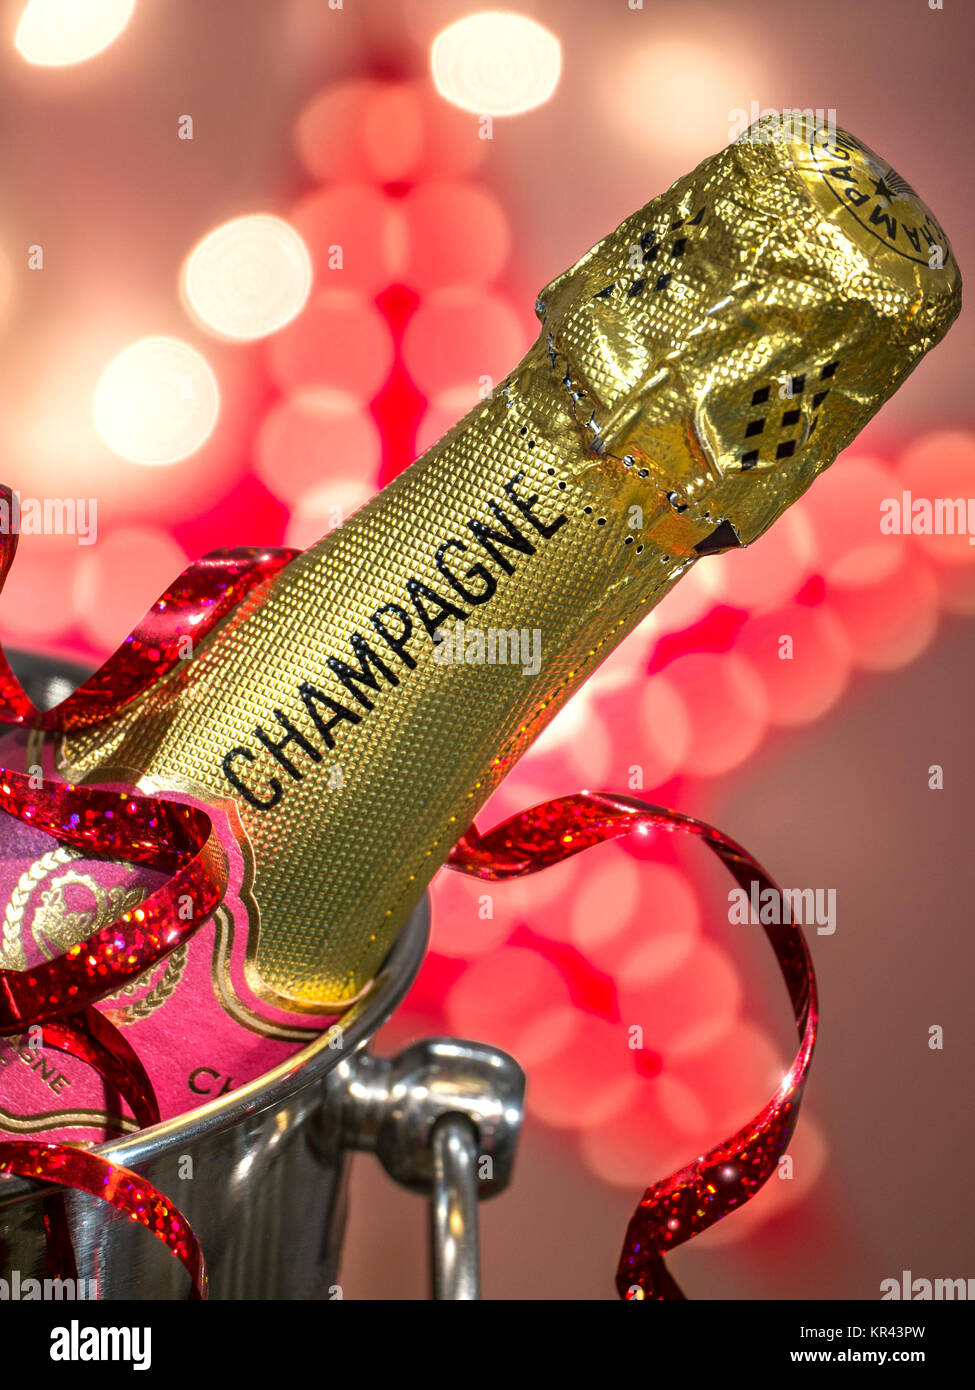 CHAMPAGNE PARTY LIGHTS Champagne bottle on ice in wine cooler champagne ice bucket, with Christmas party streamer and sparkling celebration lights Stock Photo